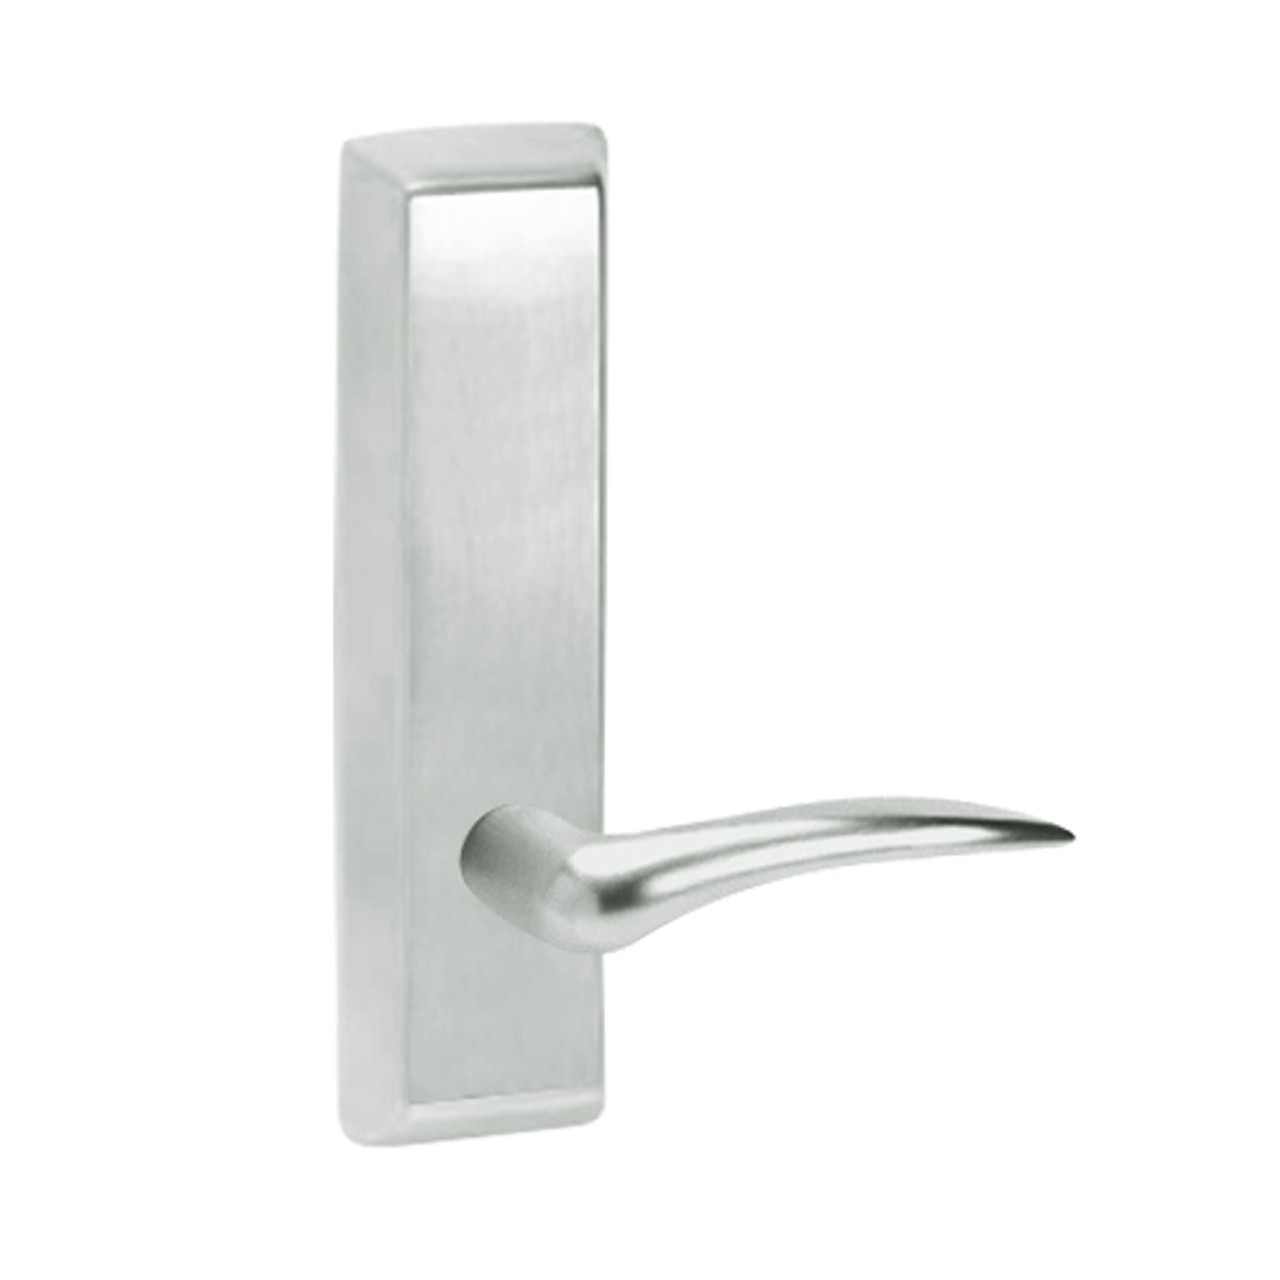 D959-618-LHR Corbin ED5000 Series Exit Device Trim with Storeroom Dirke Lever in Bright Nickel Finish